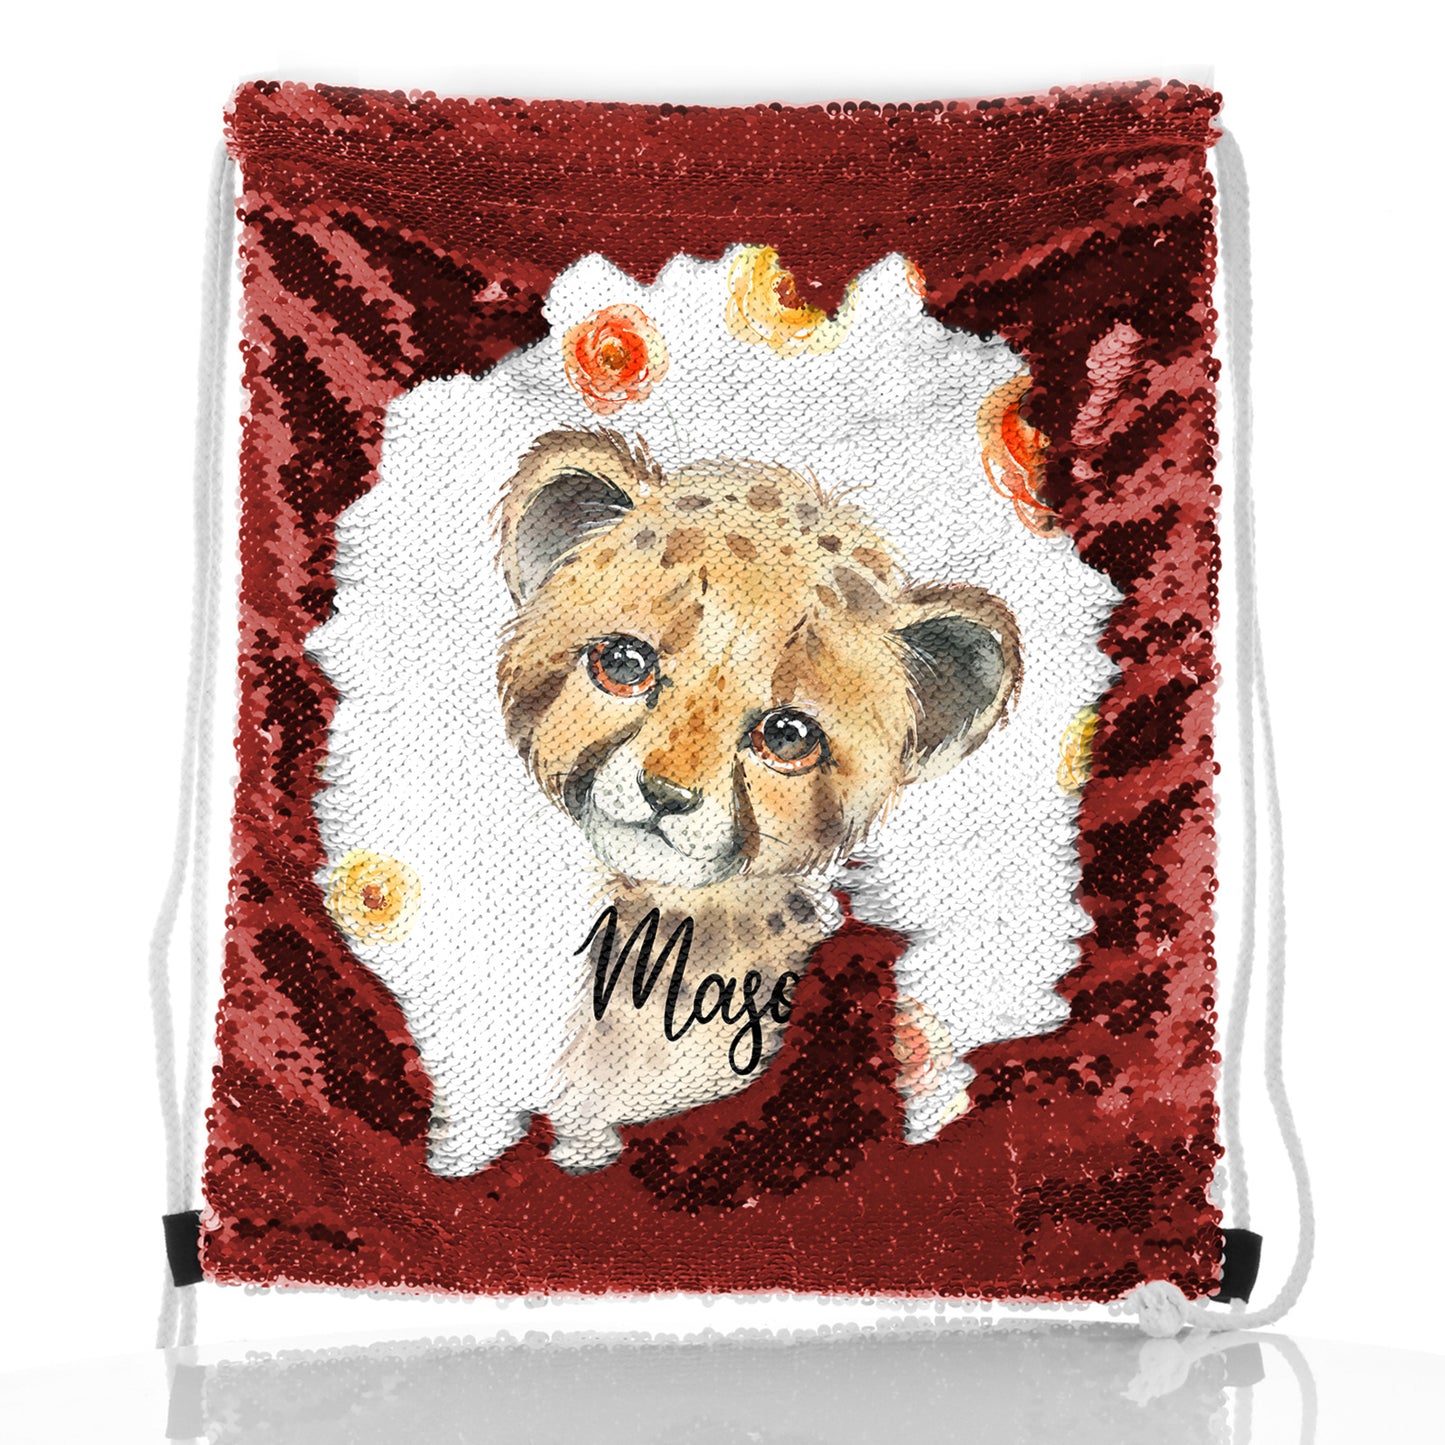 Personalised Sequin Drawstring Backpack with Spotty Leopard Cat Red and Yellow Flowers and Cute Text